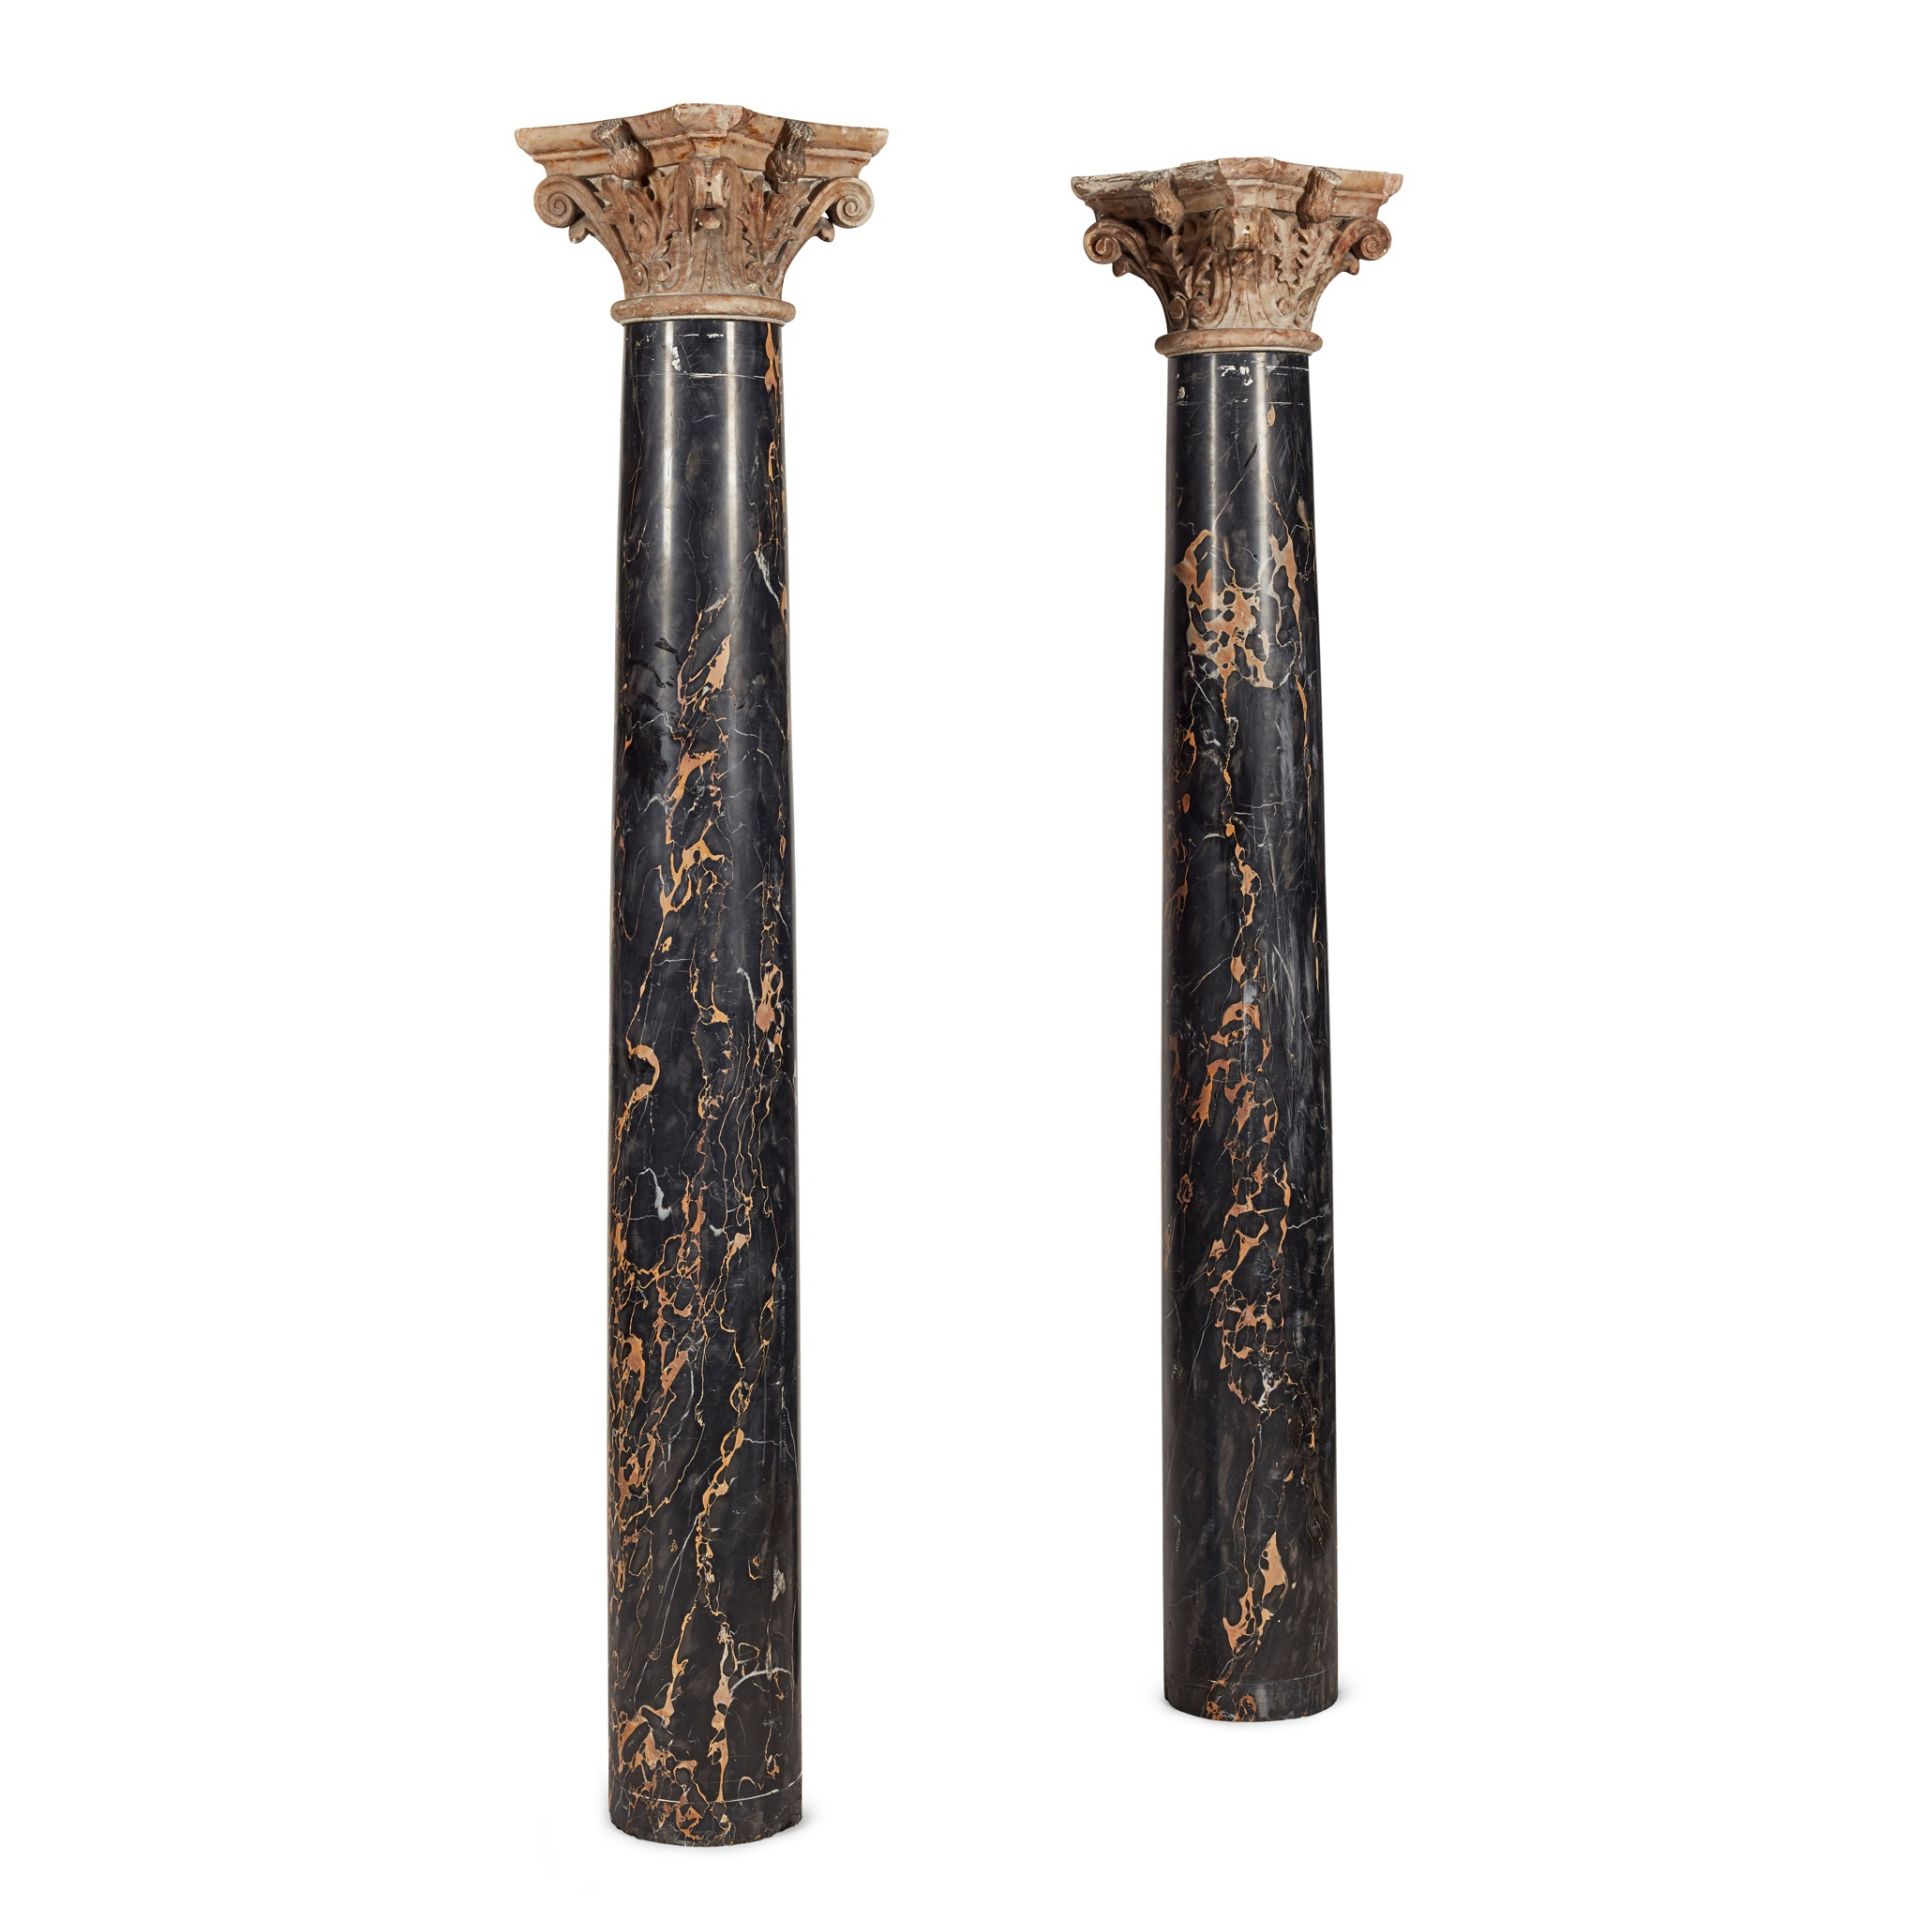 PAIR OF PORTORO AND WHITE MARBLE COLUMNS EARLY 19TH CENTURY